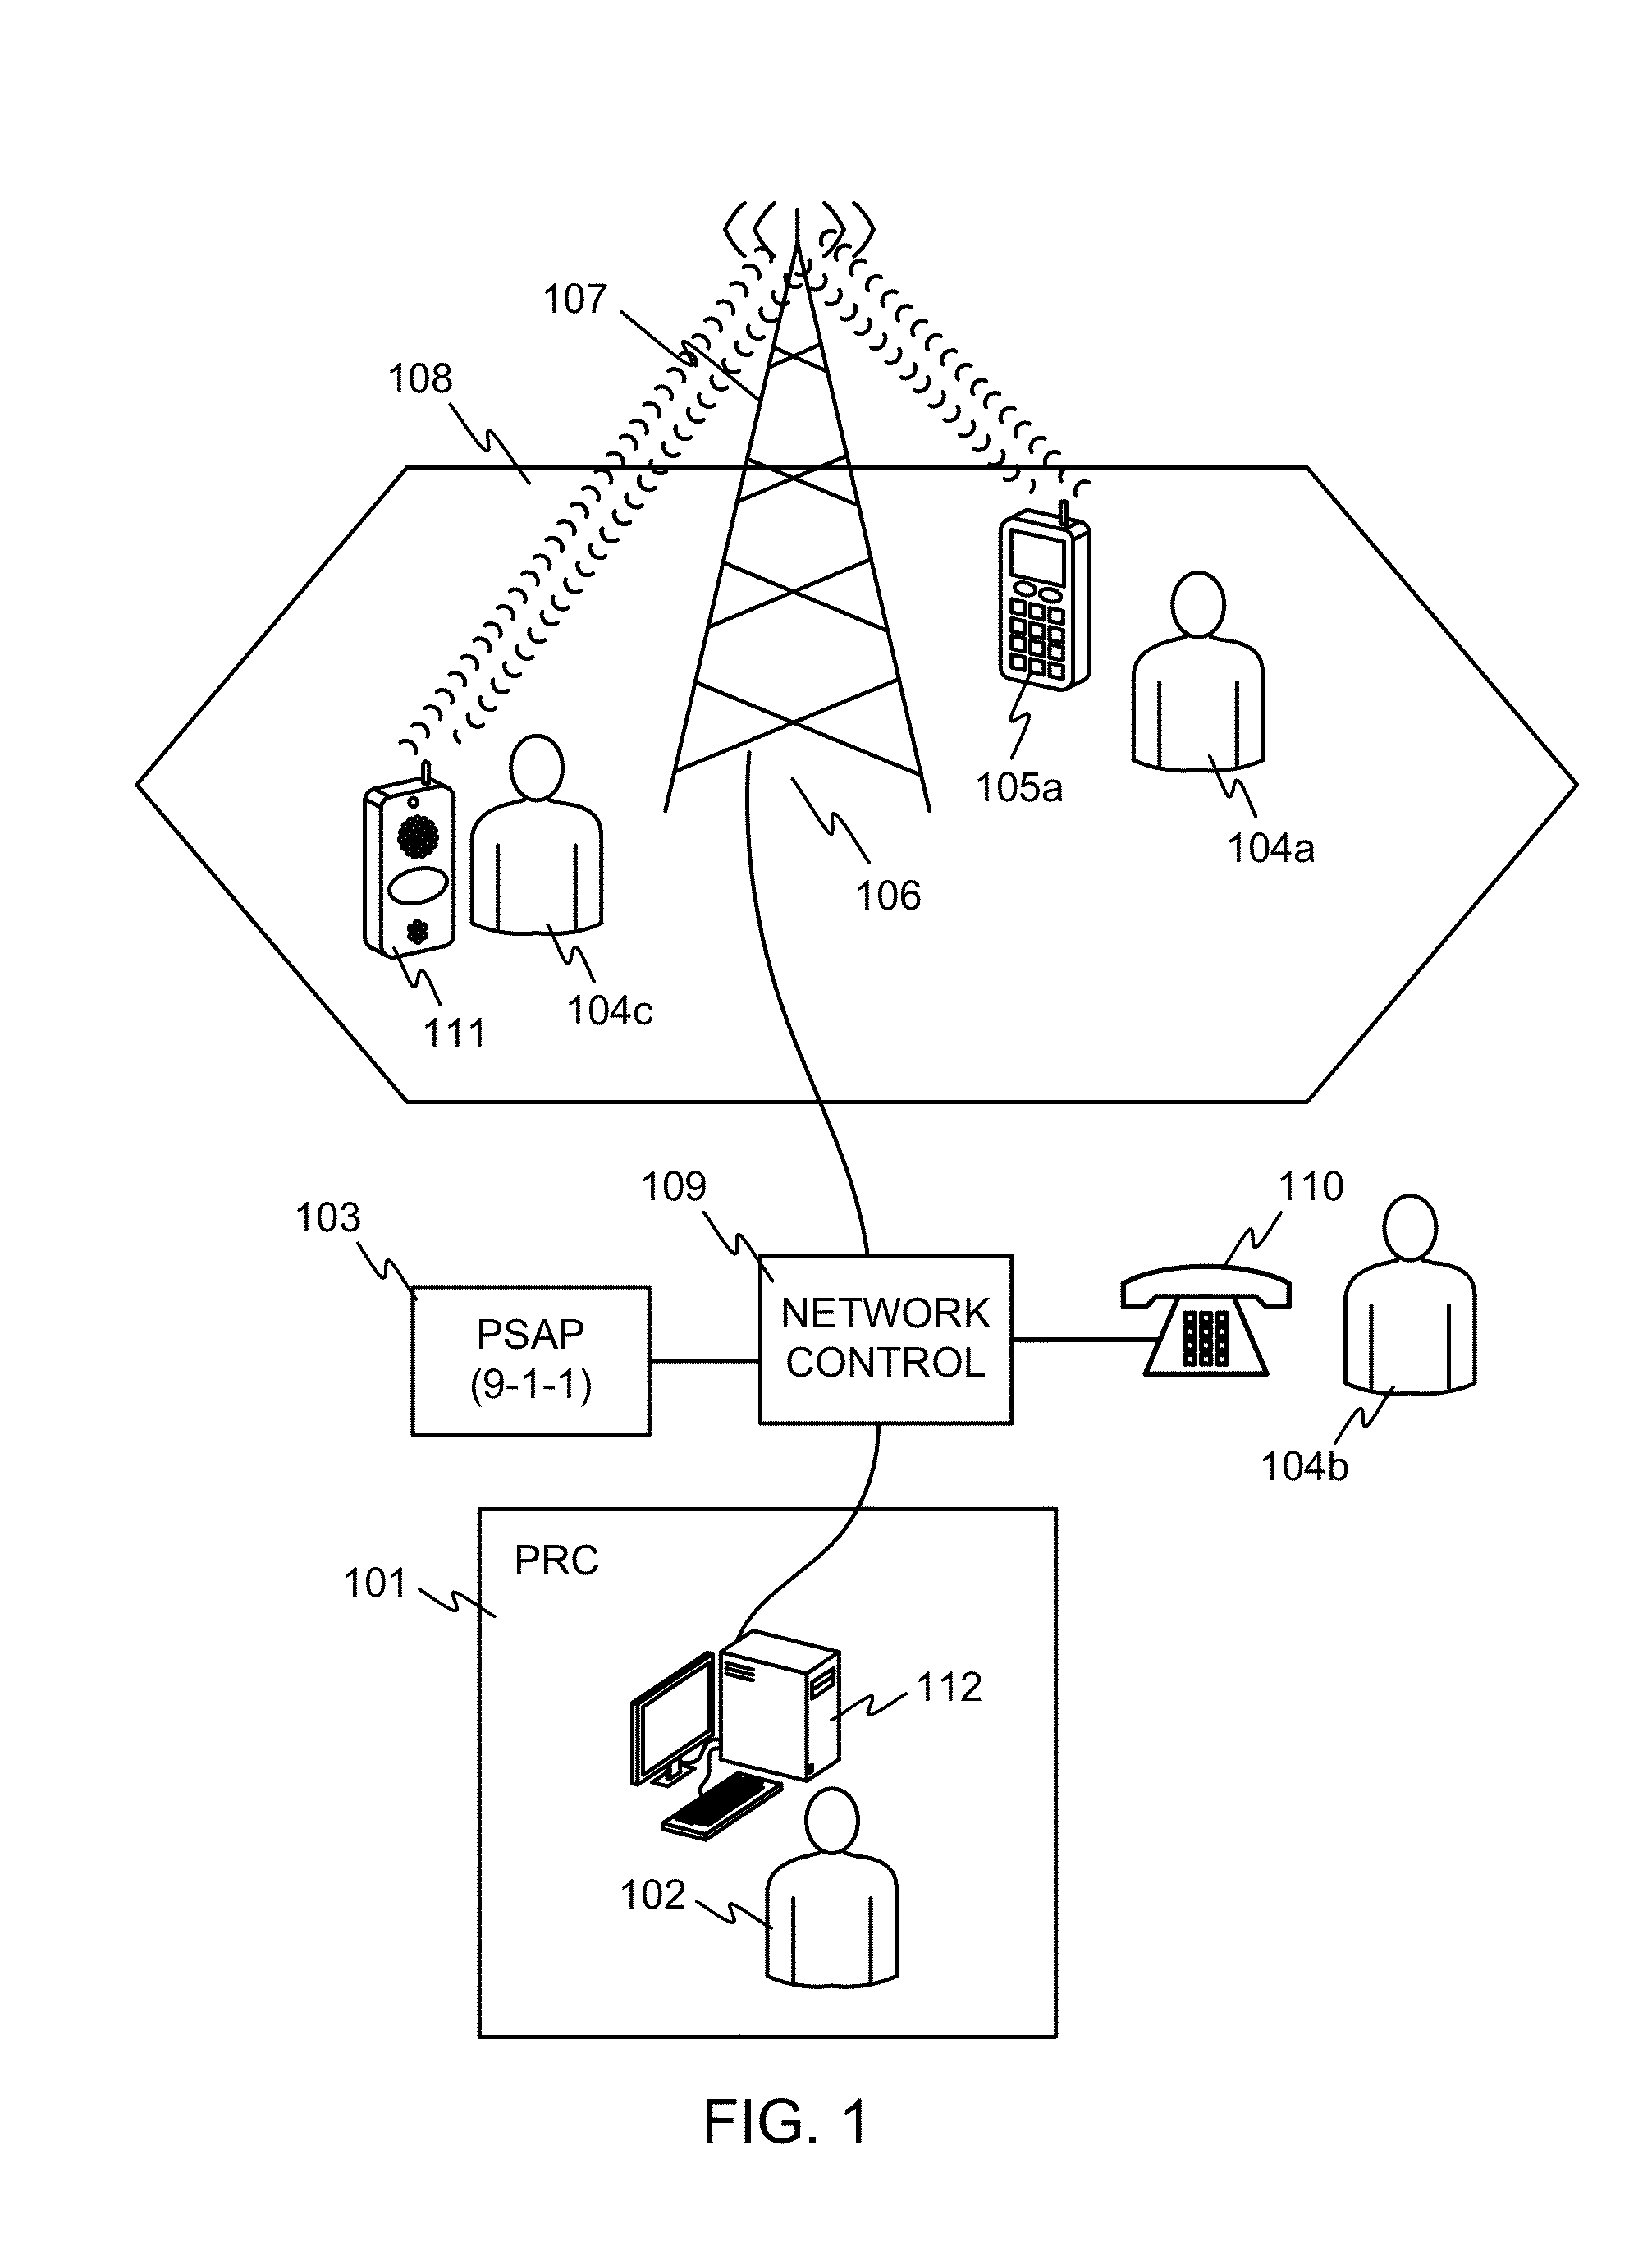 Method for engaging isolated individuals